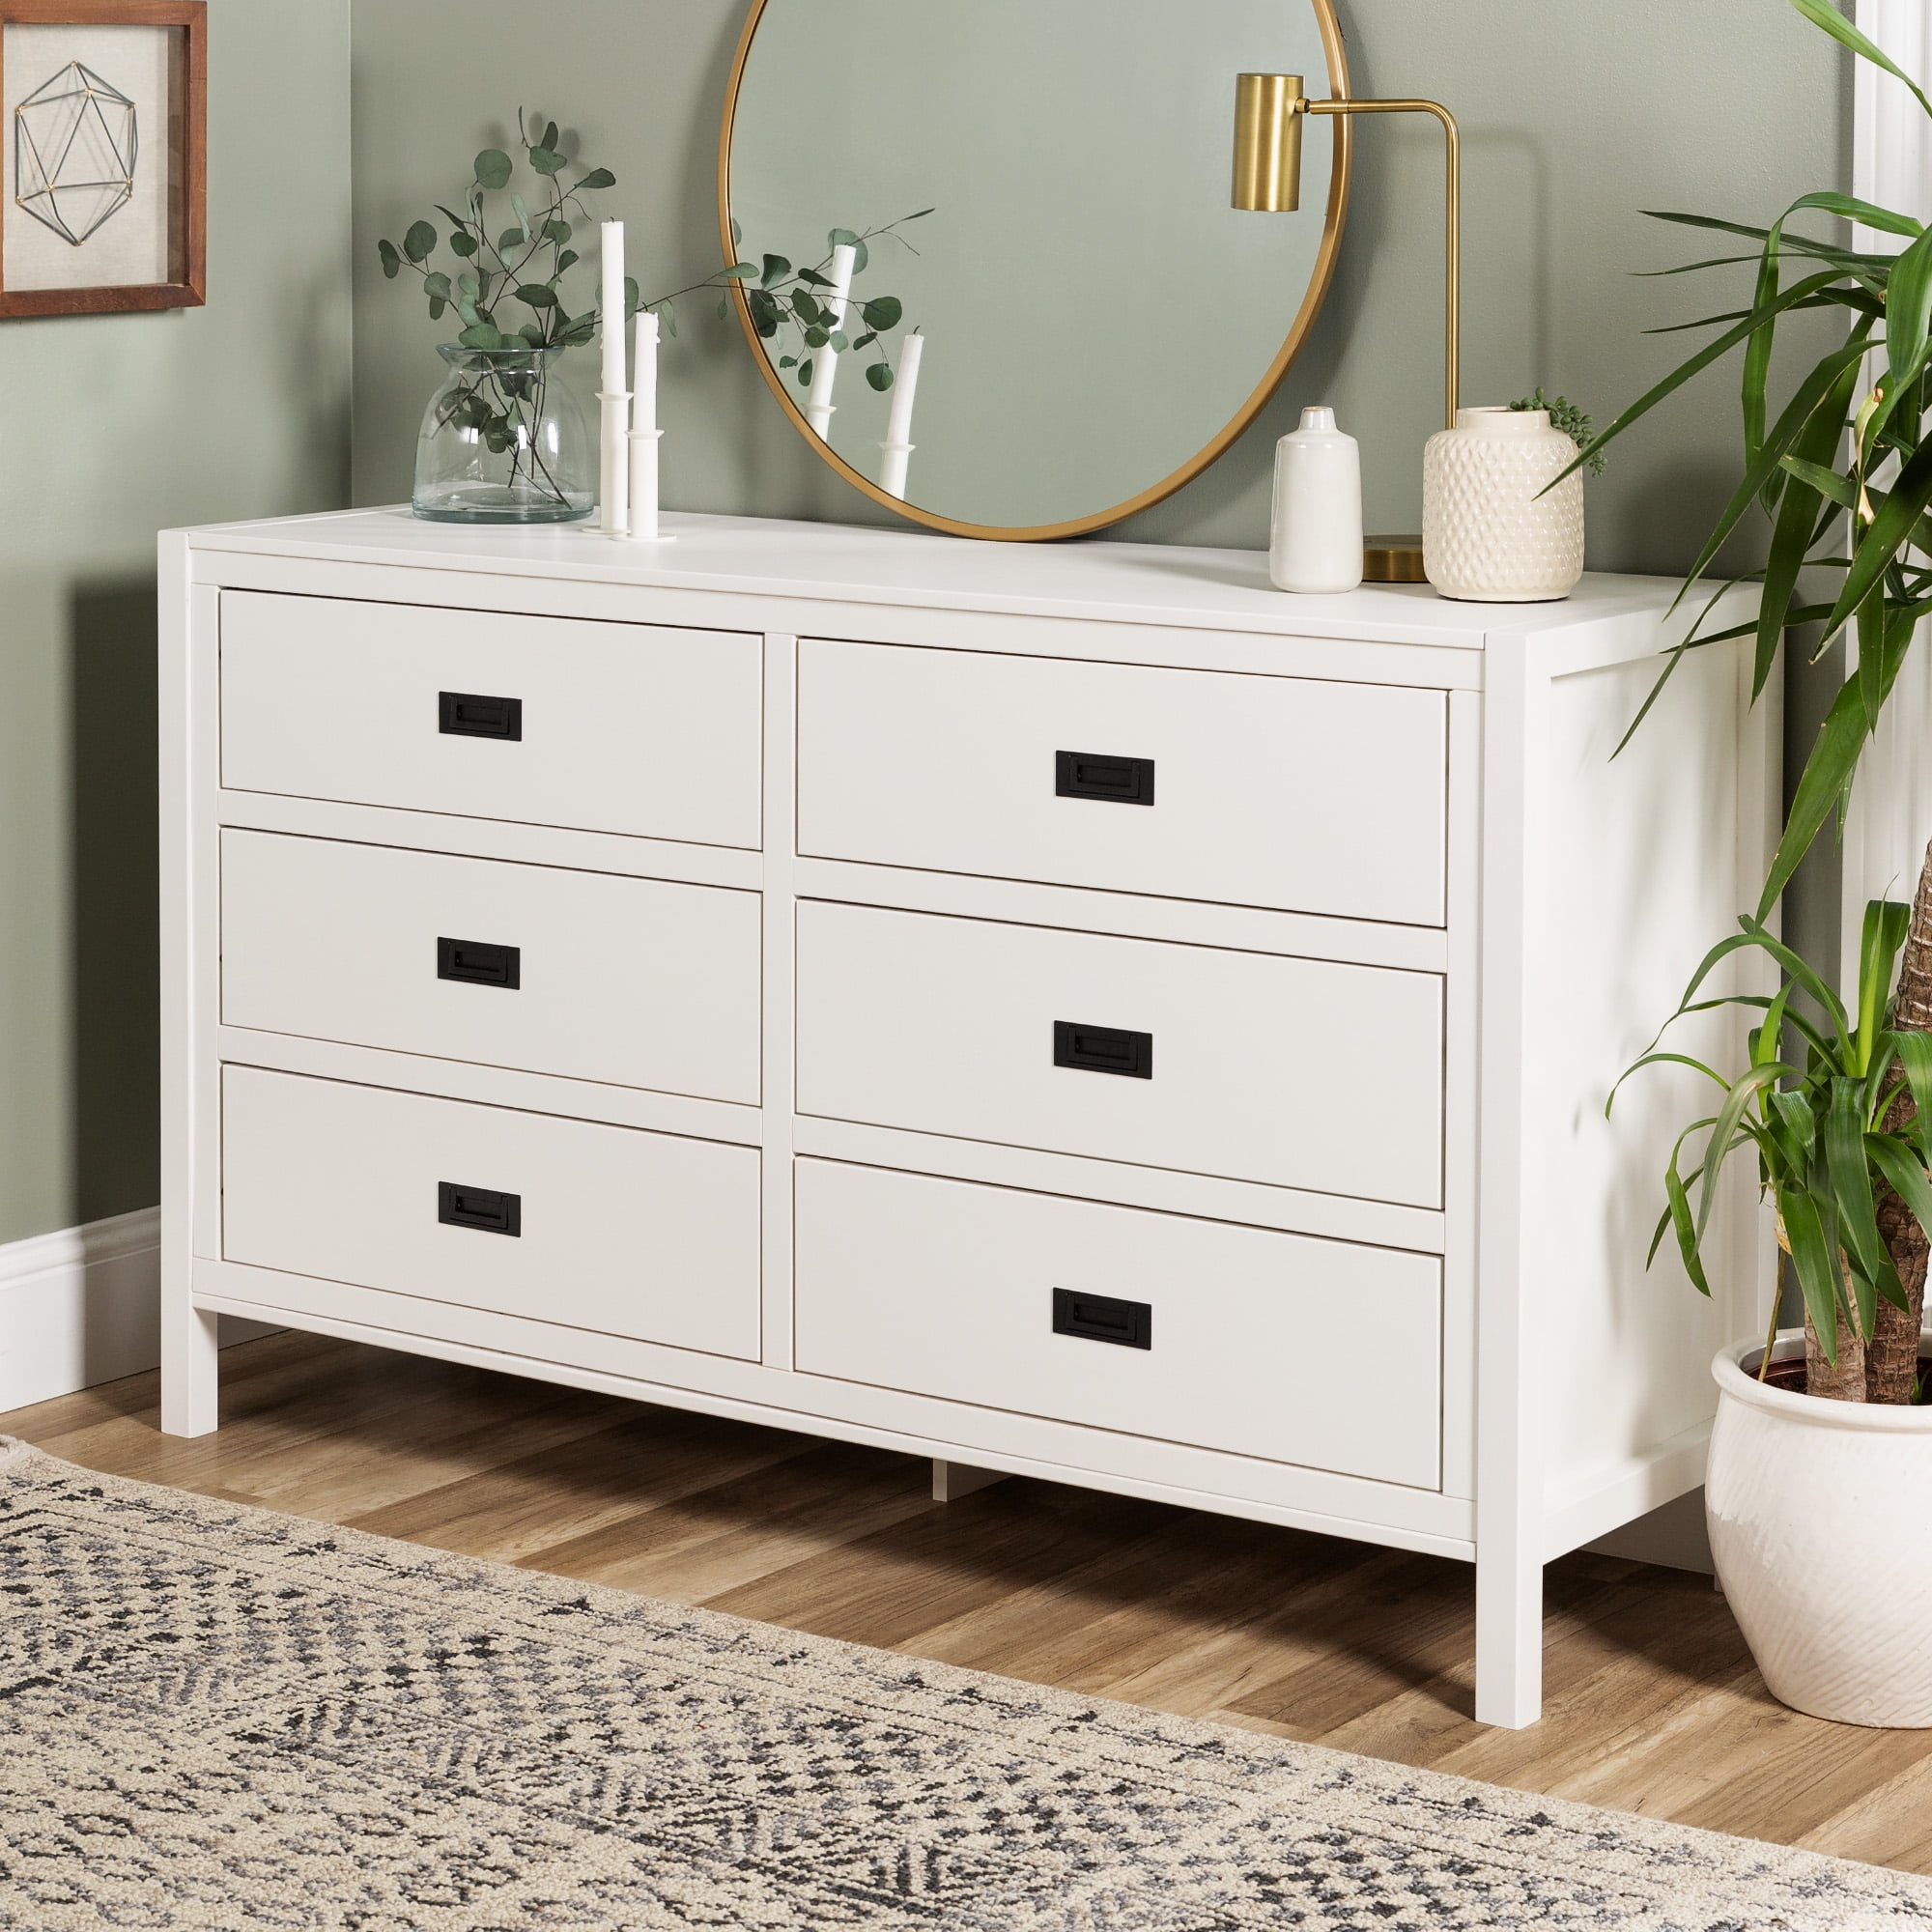 Annabelle Six Drawer Solid Wood White, Open Face Dresser